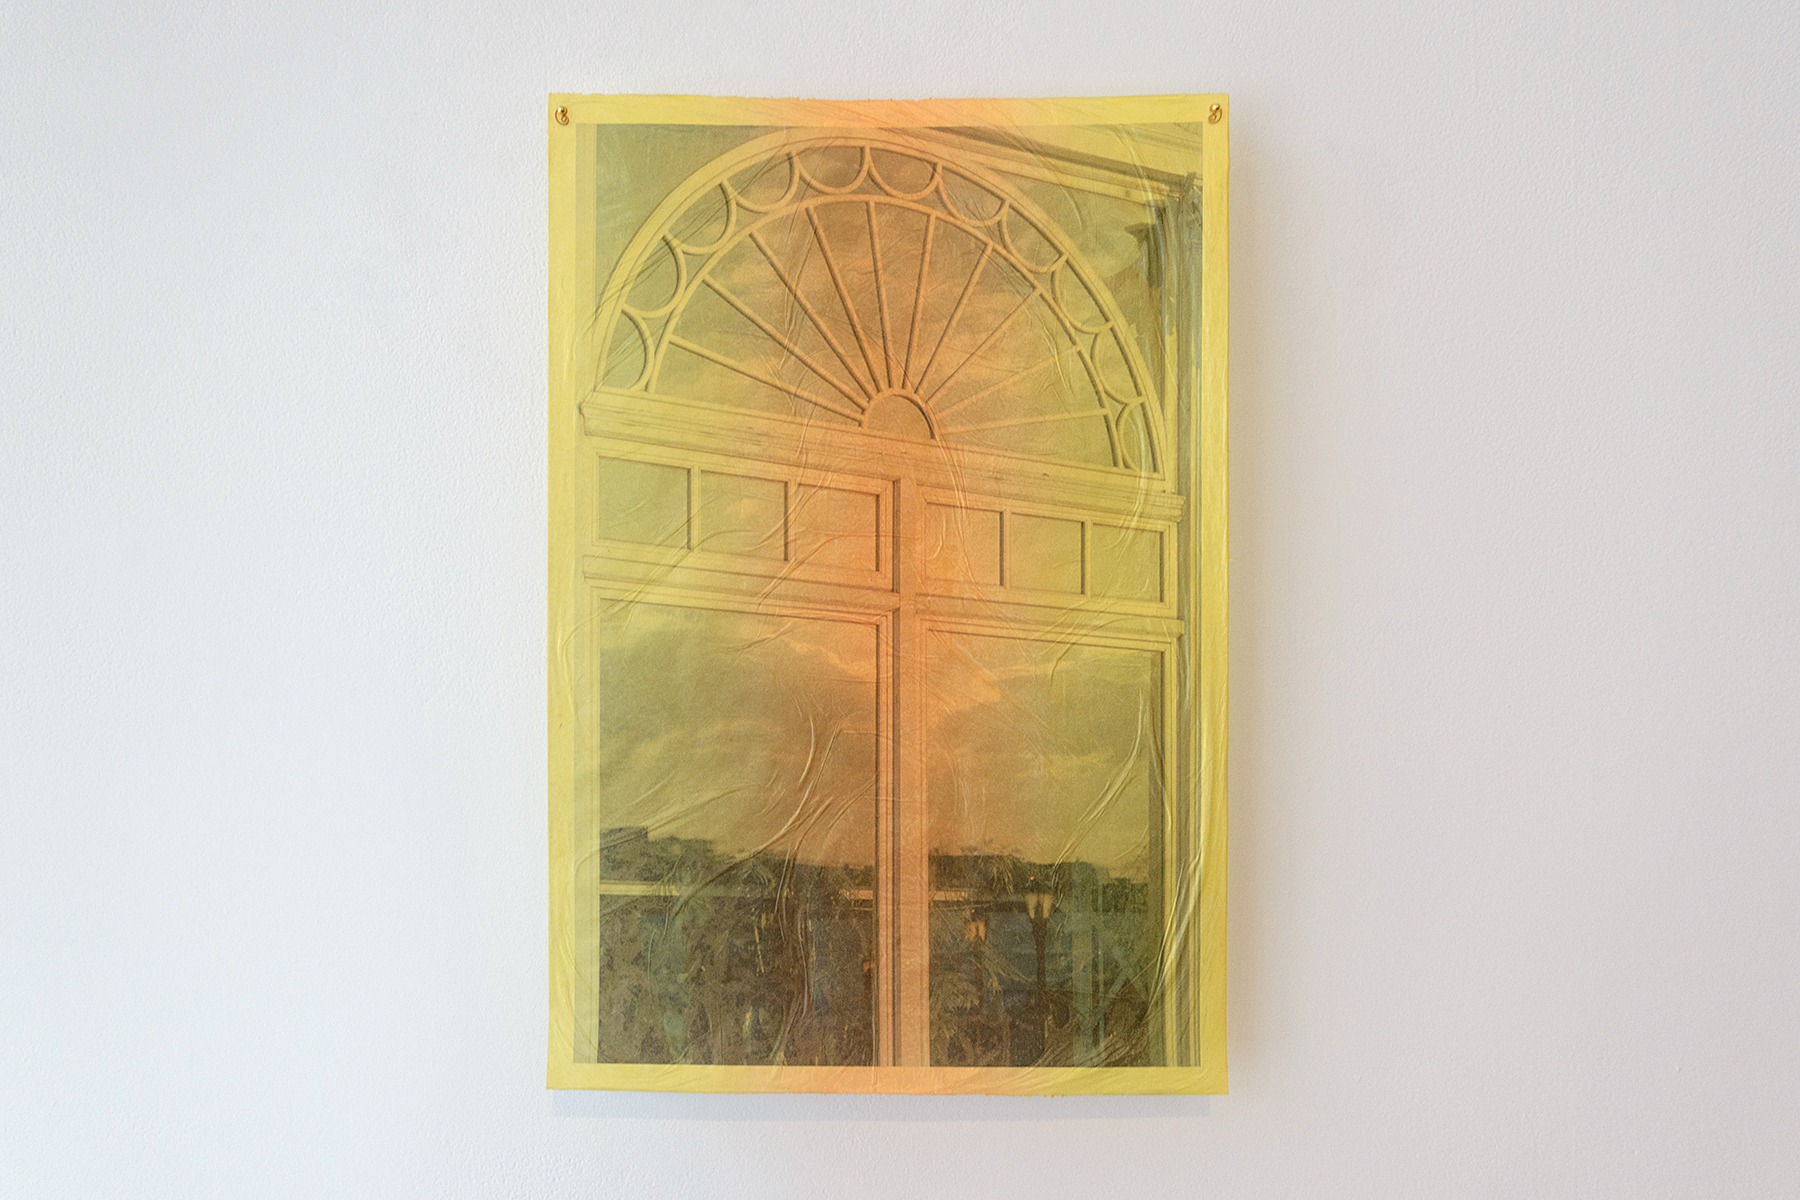     Steven Beckly, Sun-Kissed, 2020. Inkjet print on tissue paper and gold pins

